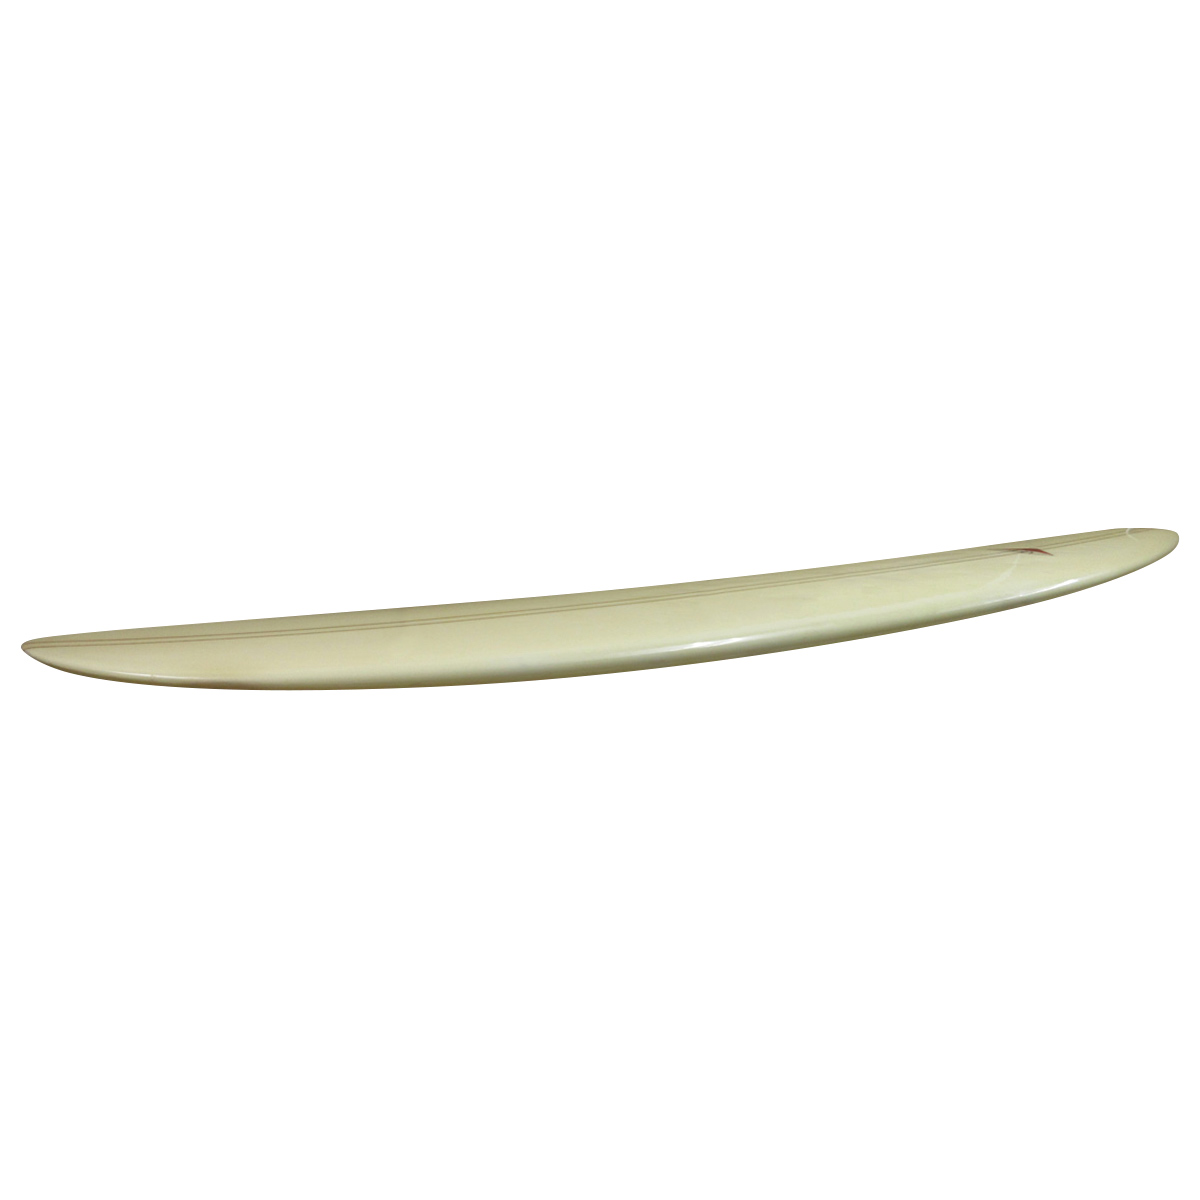 Yater surfboards / SPOON 9`6 Shaped by Renny Yater